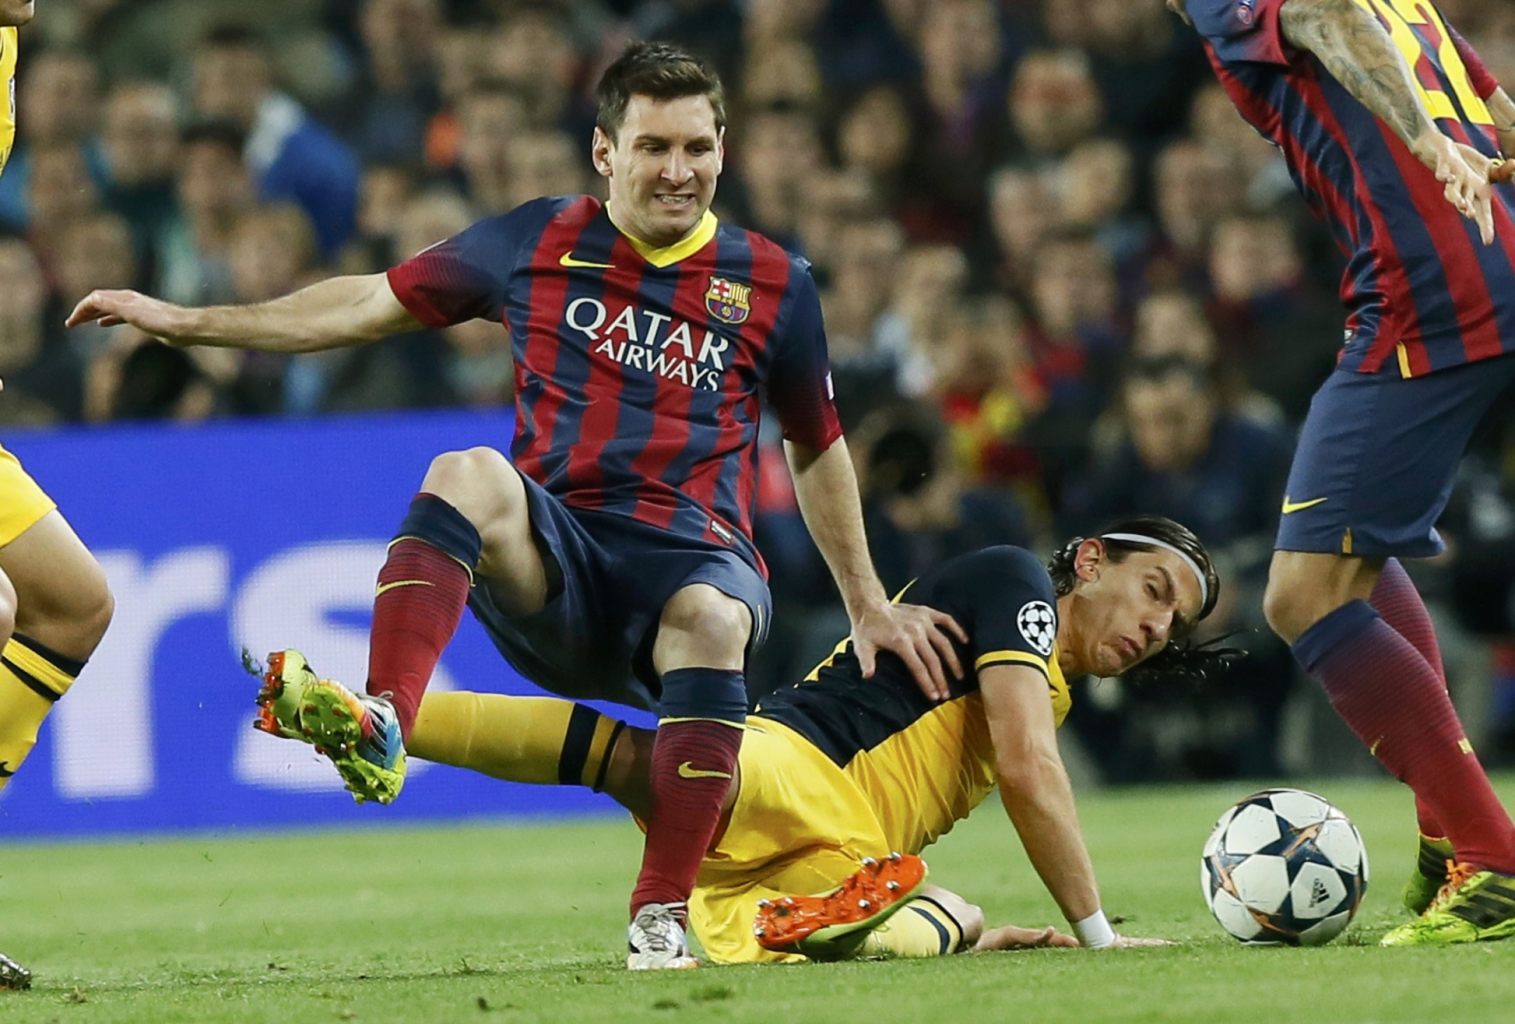 Lionel Messi tackled from behind, in Barcelona vs Atletico Madrid